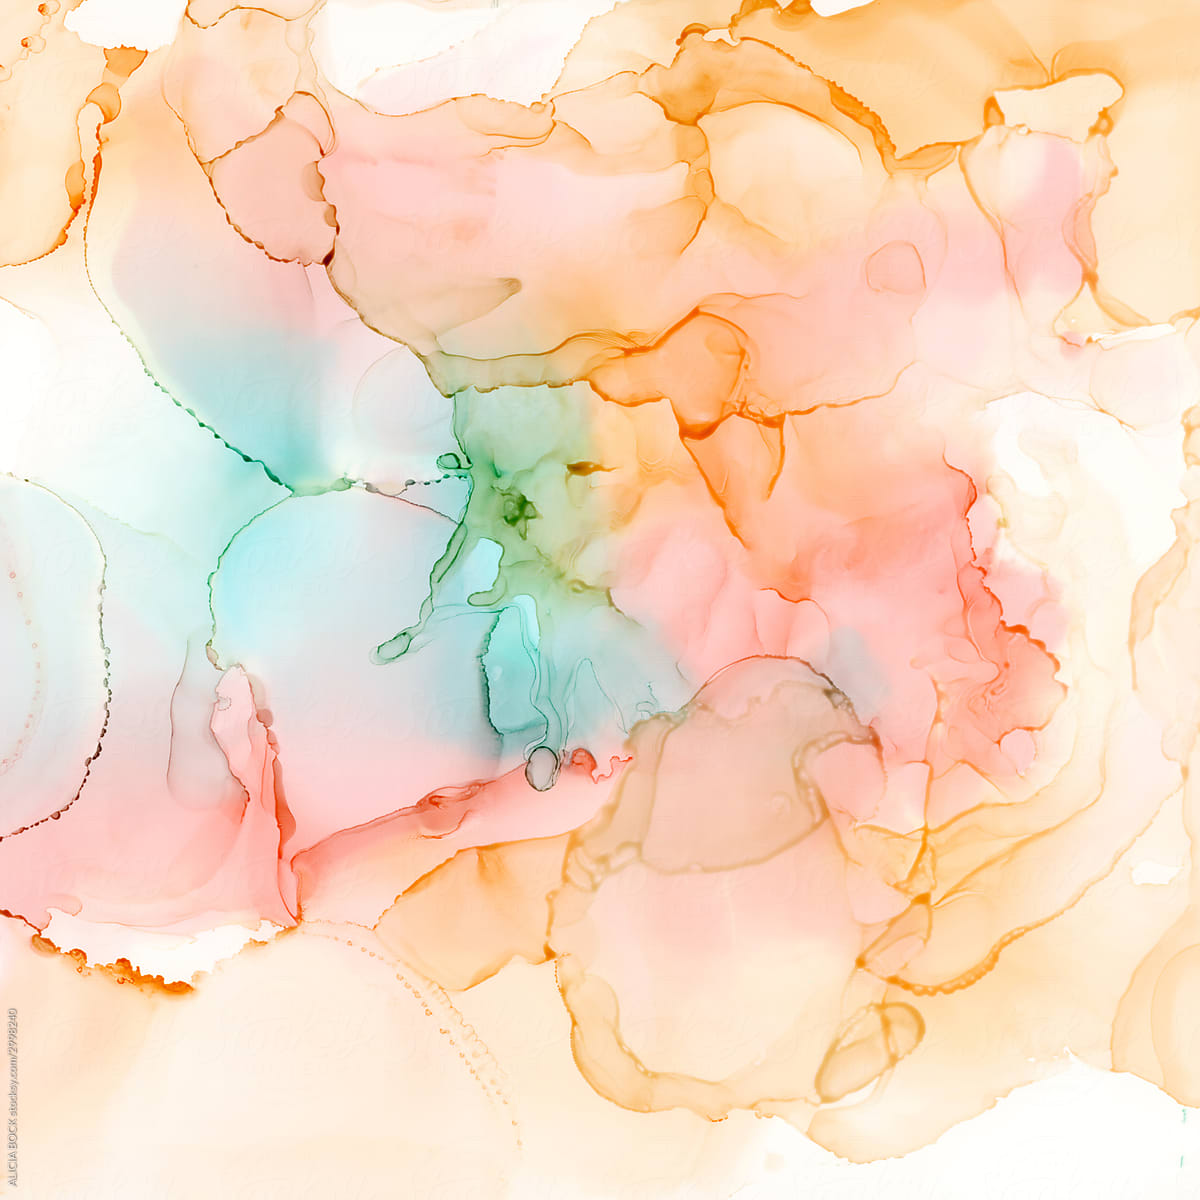 Pastel Colored Abstract Alcohol Ink Painting